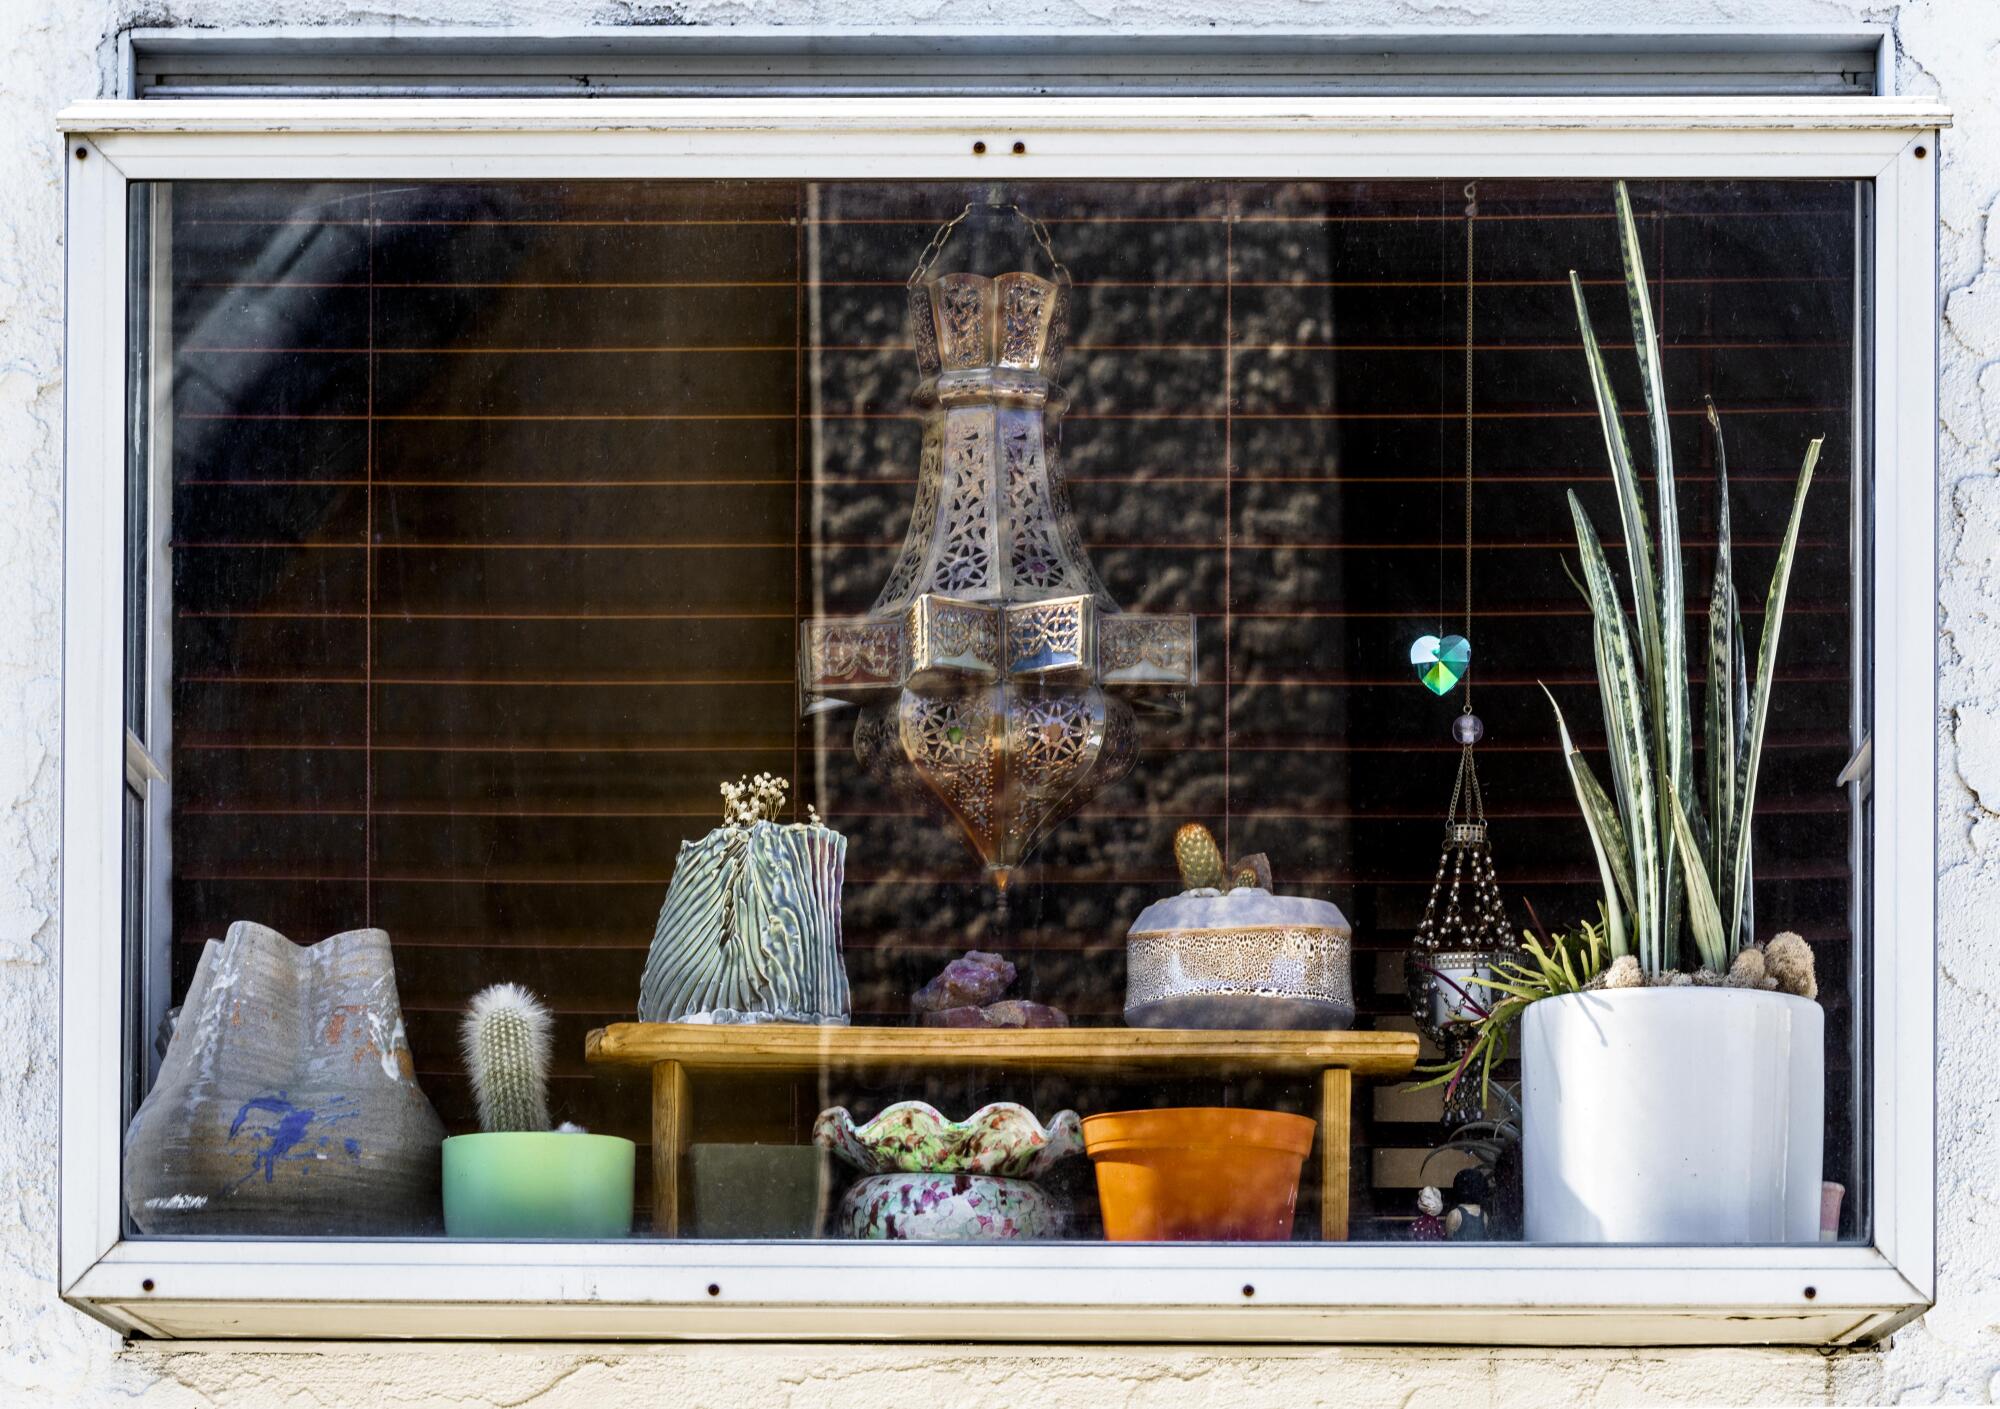 A glass box window on the side of Brandy Williams’ home filled with plants and cacti in containers